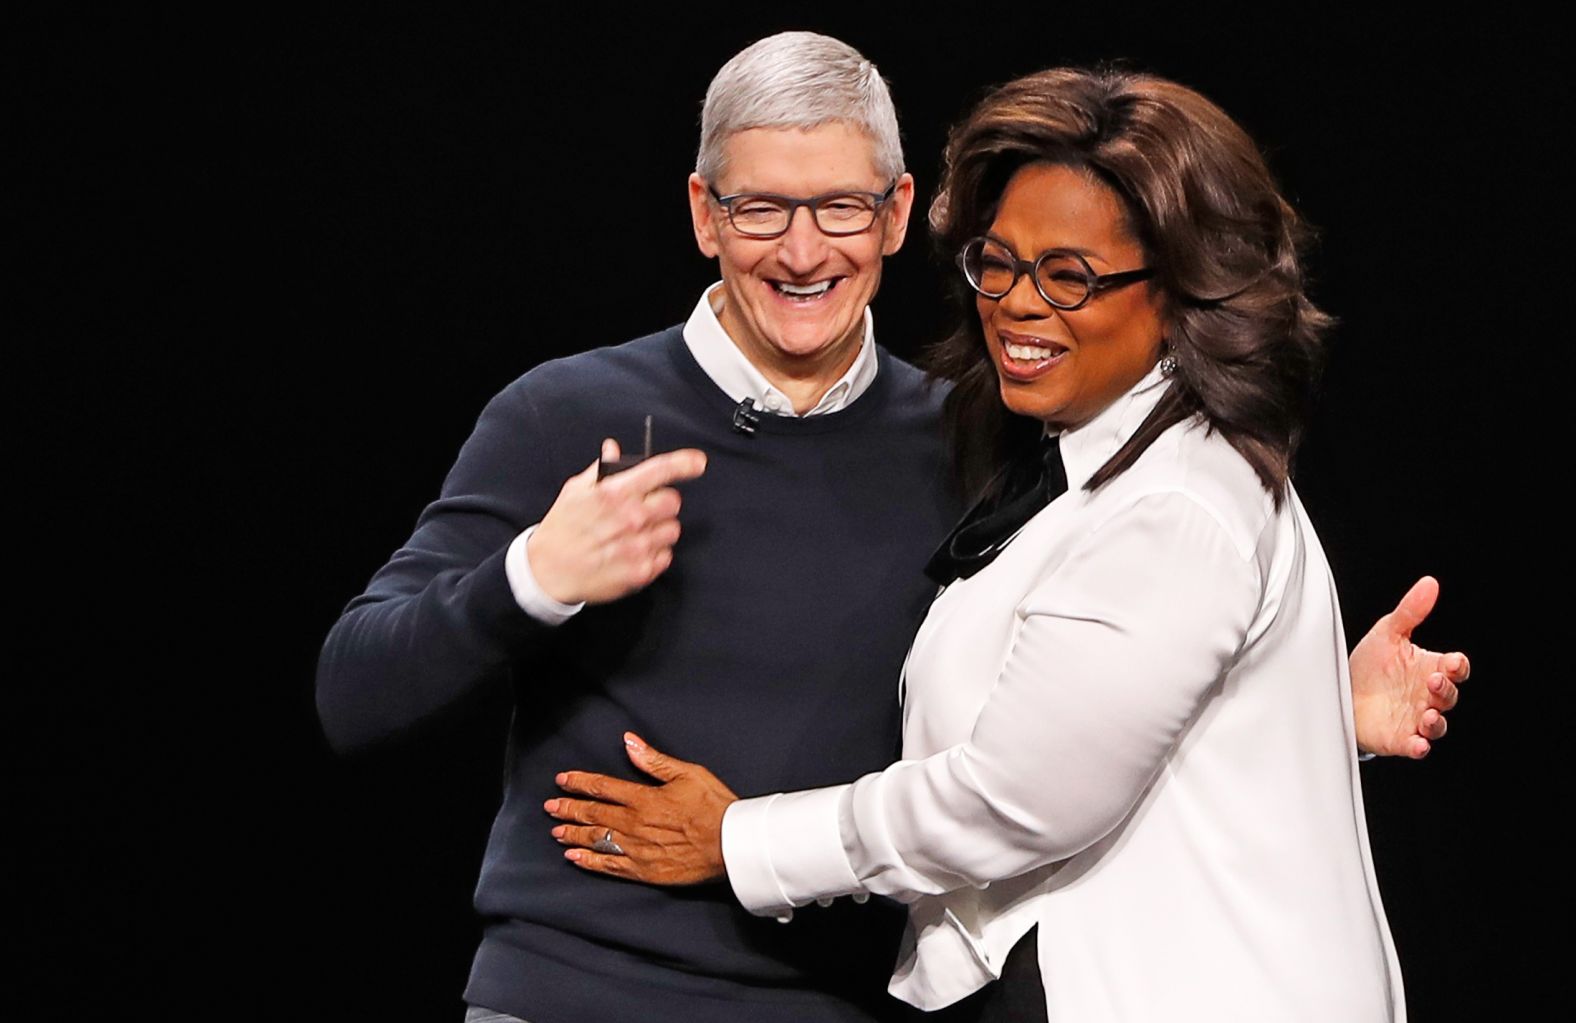 Cook and Oprah Winfrey hug during an Apple special event in Cupertino in March 2019.